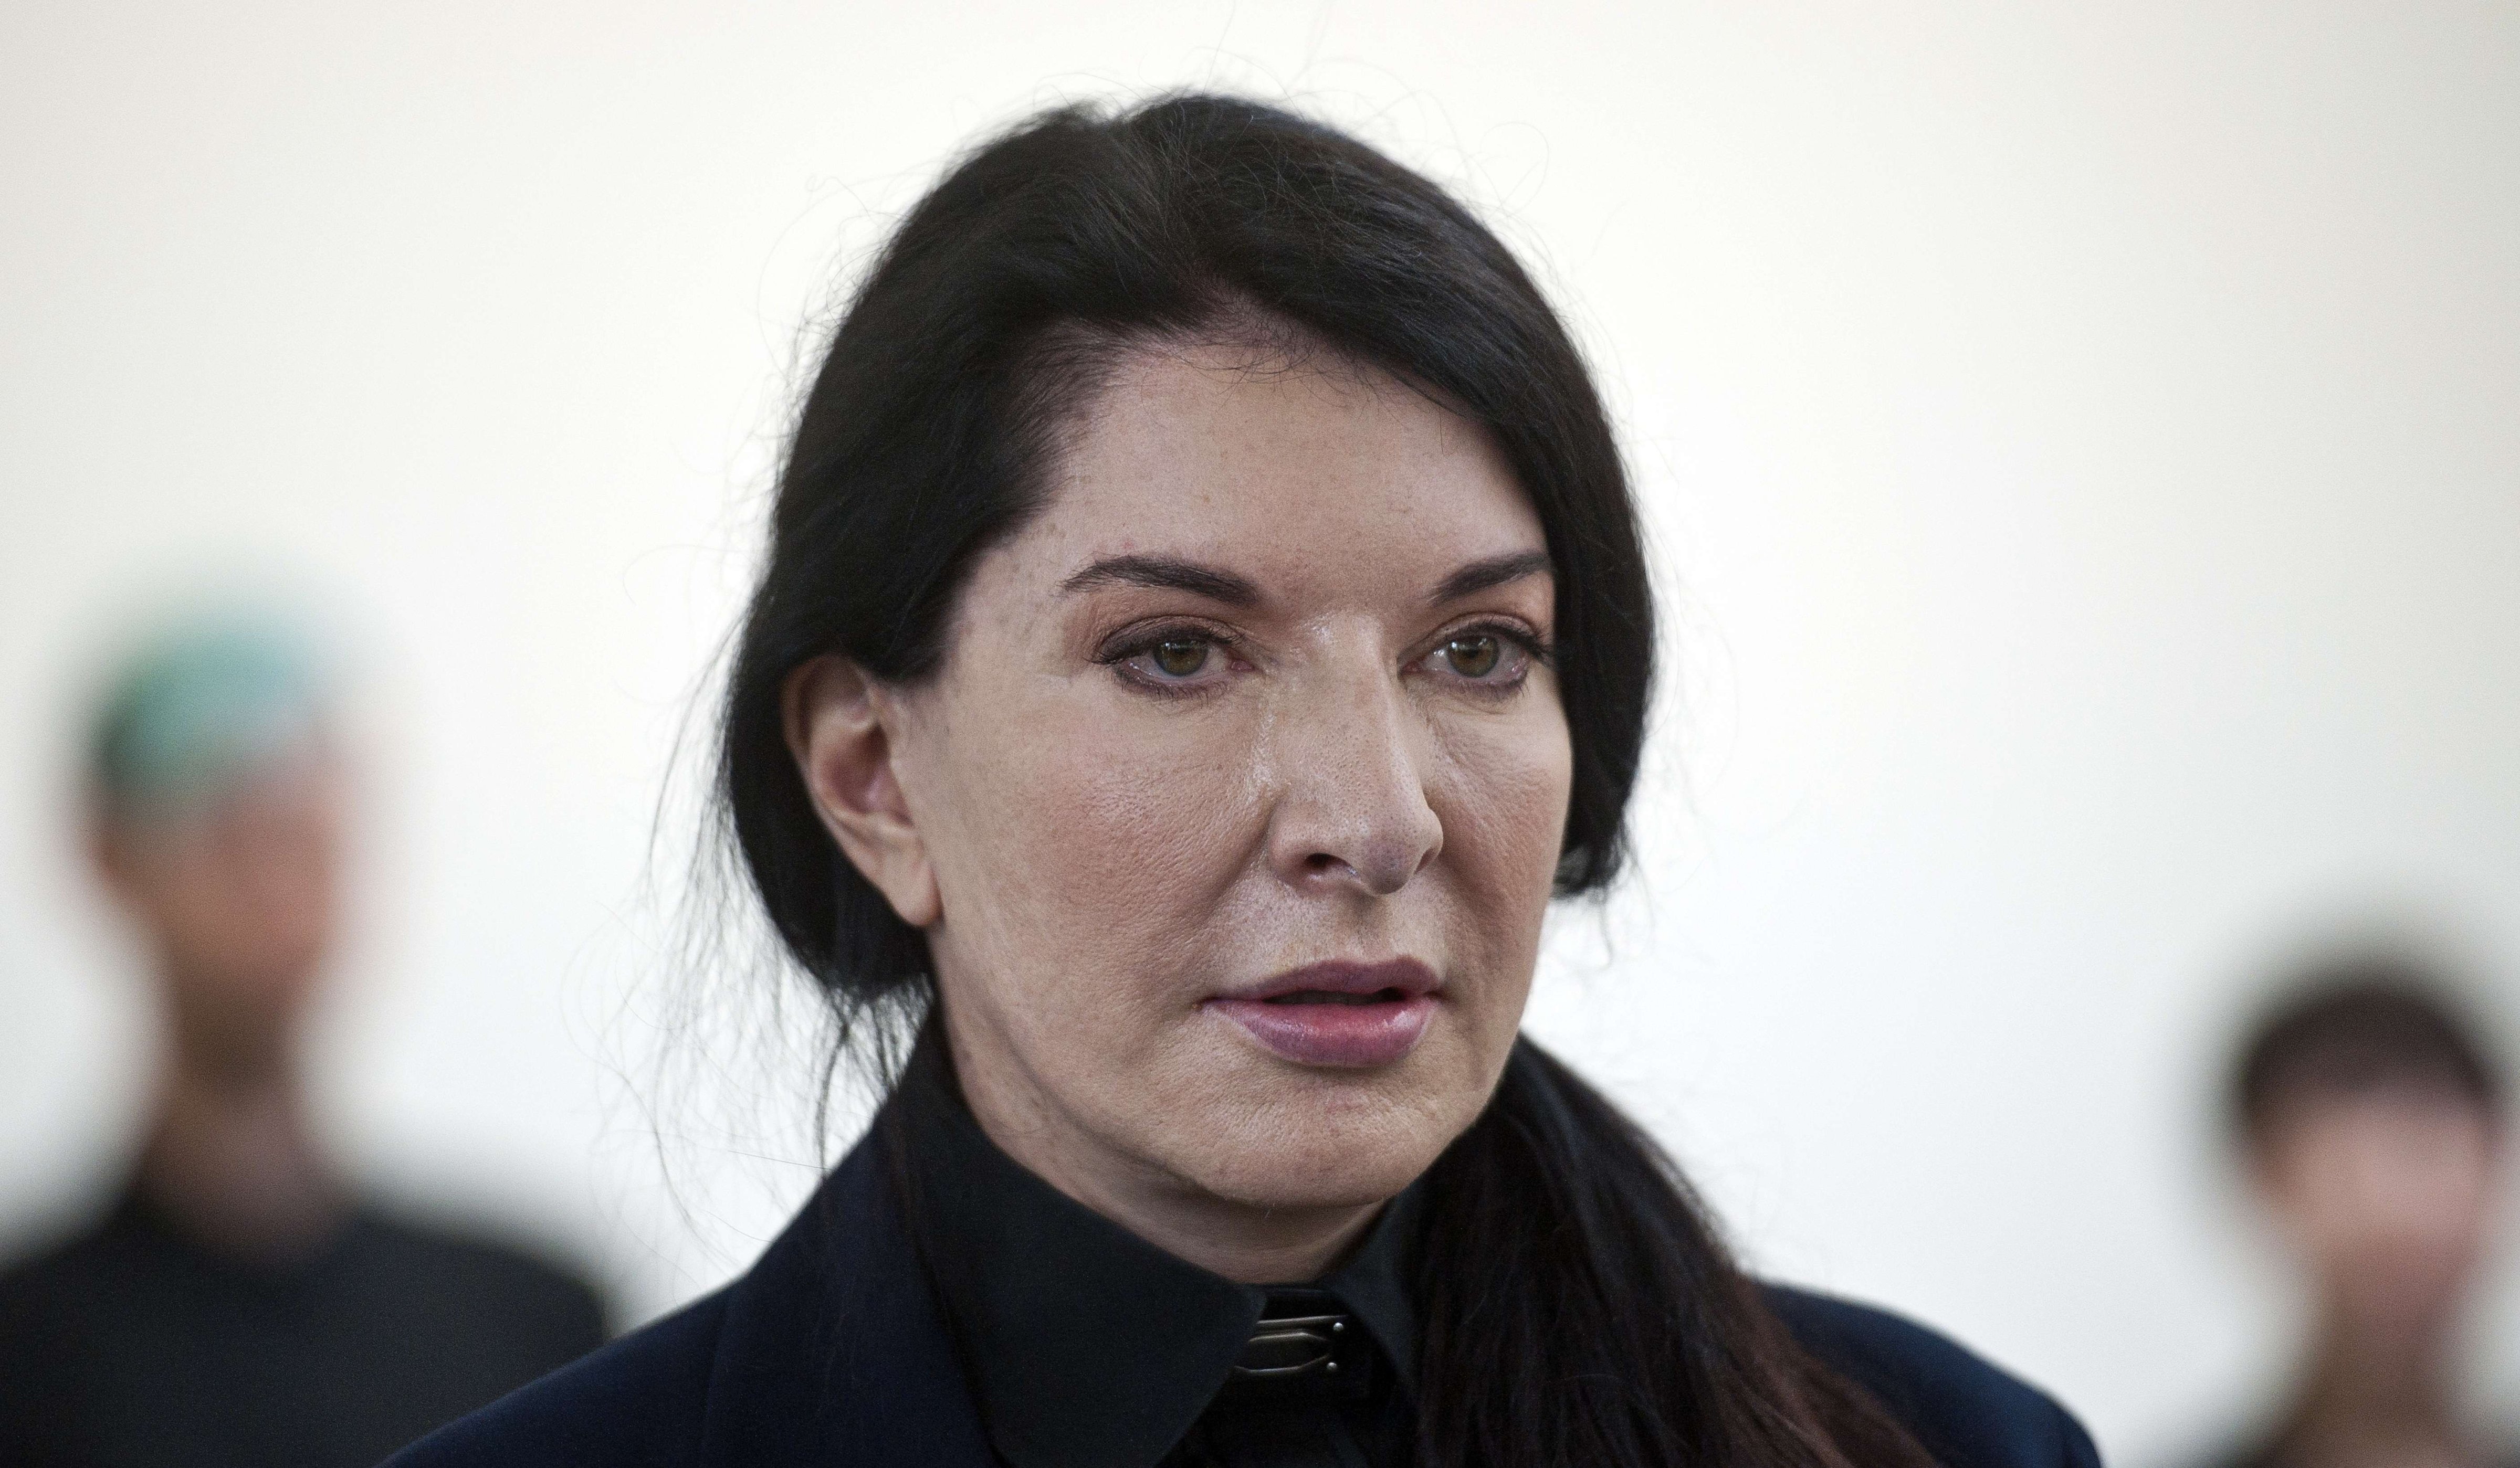 Serbian-born performance artist Marina Abramovic attends a press conference to announce her latest durational performance at the Serpentine Gallery in Hyde Park, London on June 9, 2014. (Will Oliver—AFP/Getty Images)